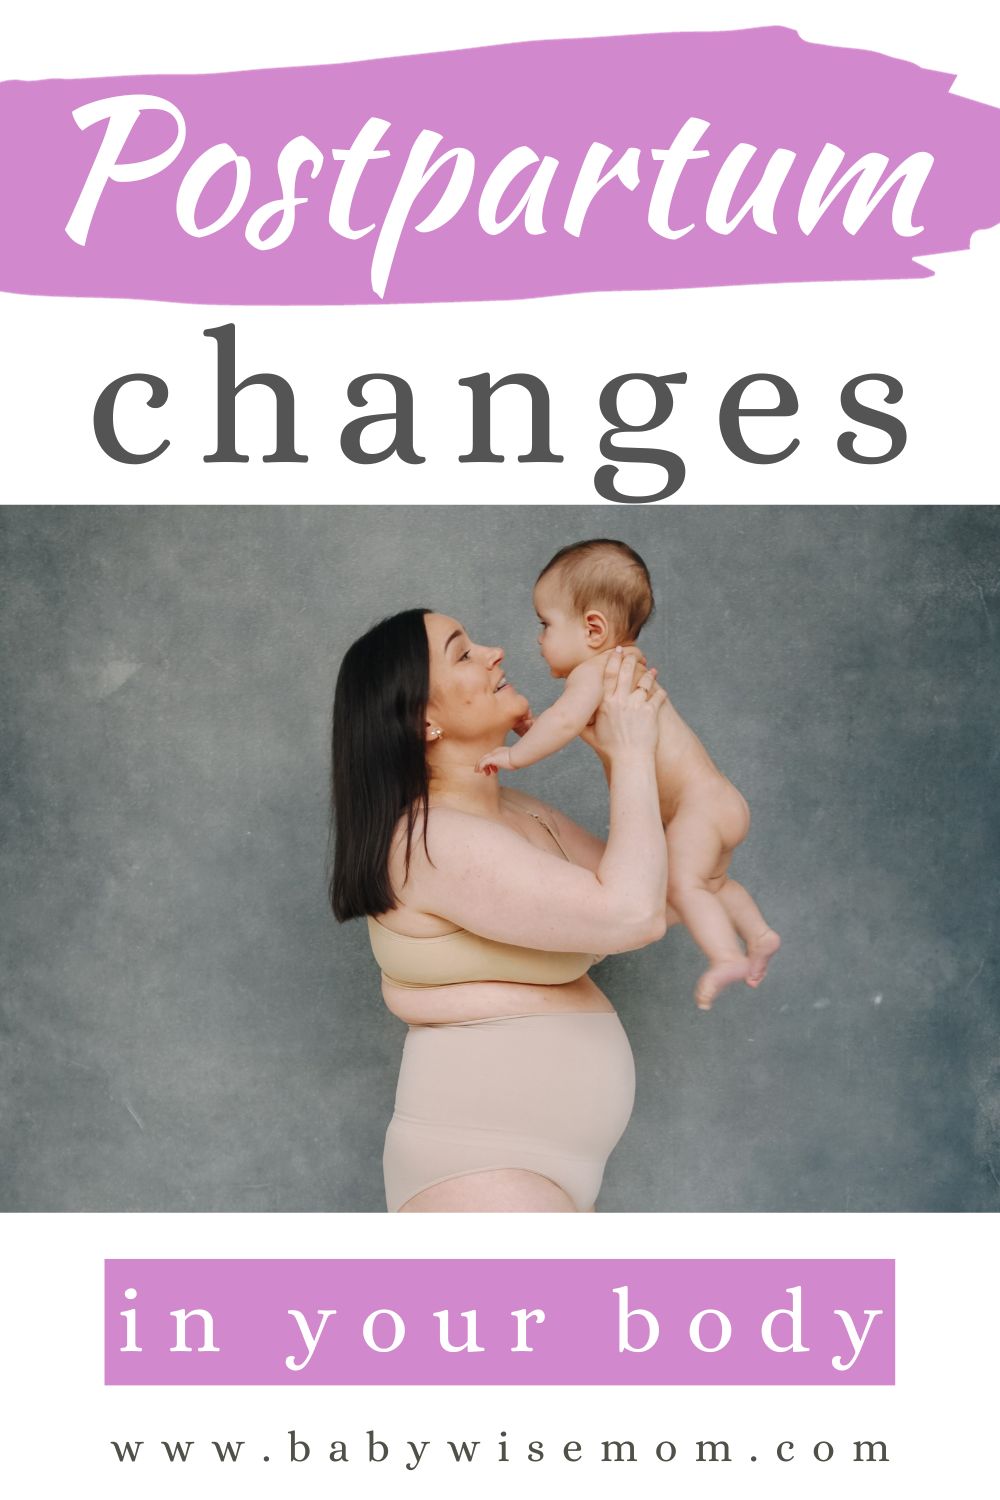 Postpartum changes in your body pinnable image